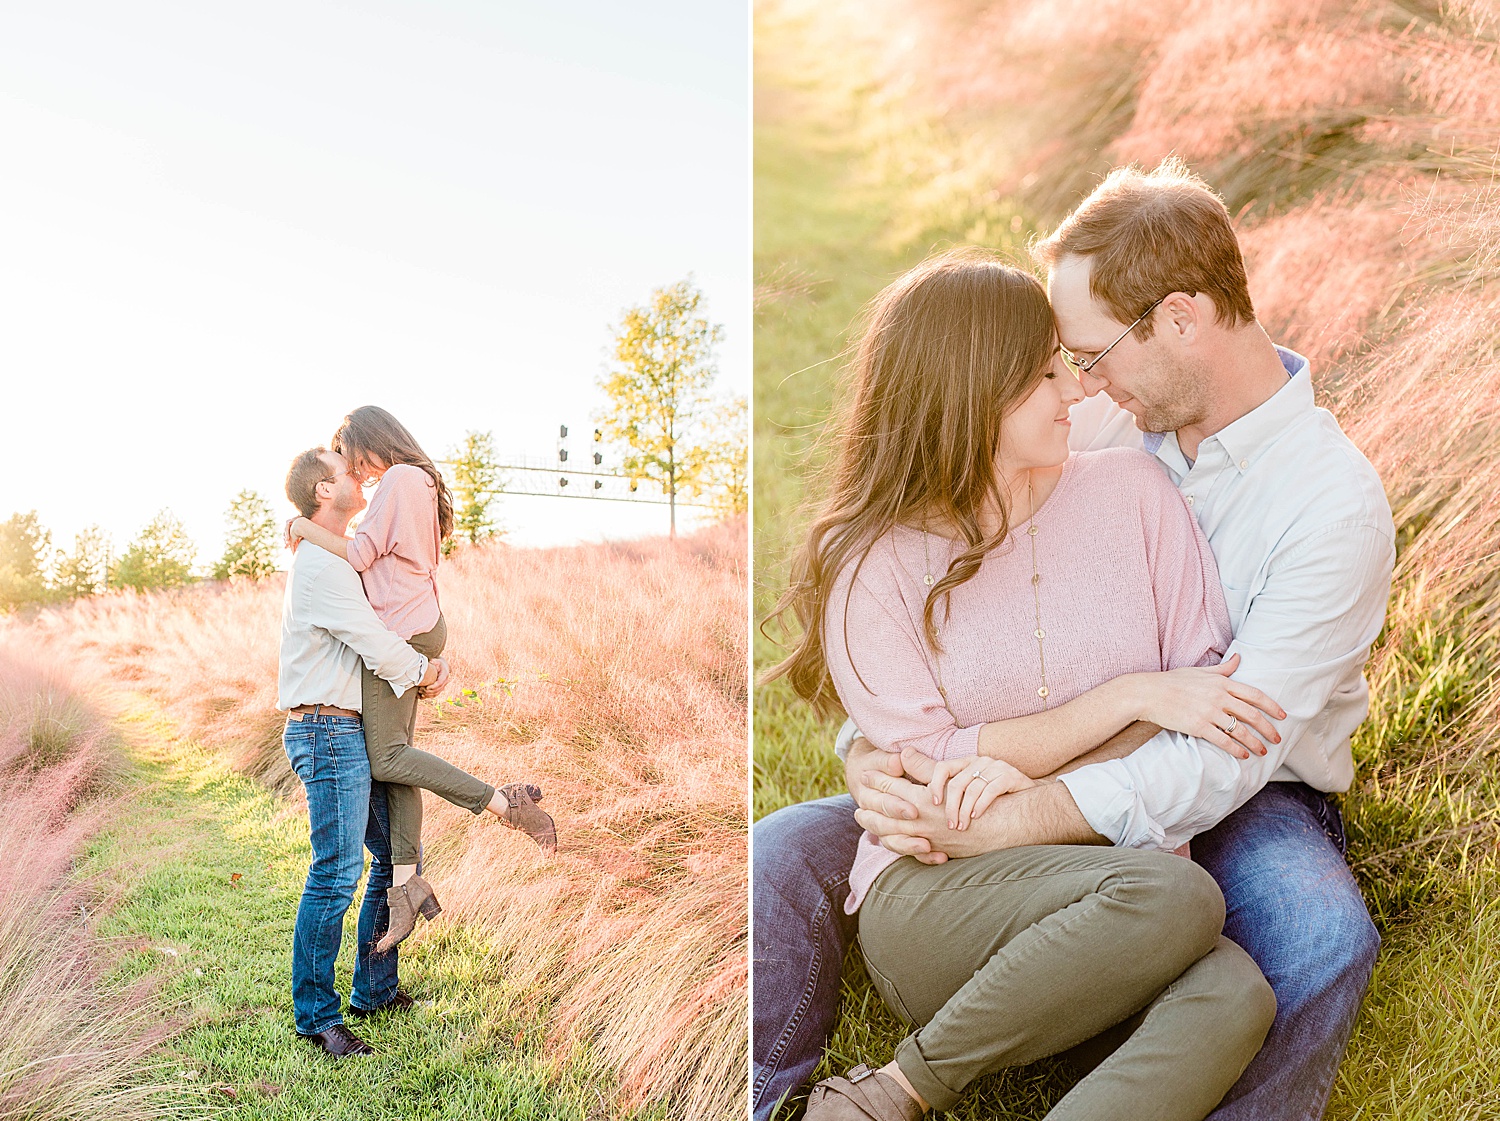 man lifts his fiancé up during engagement session